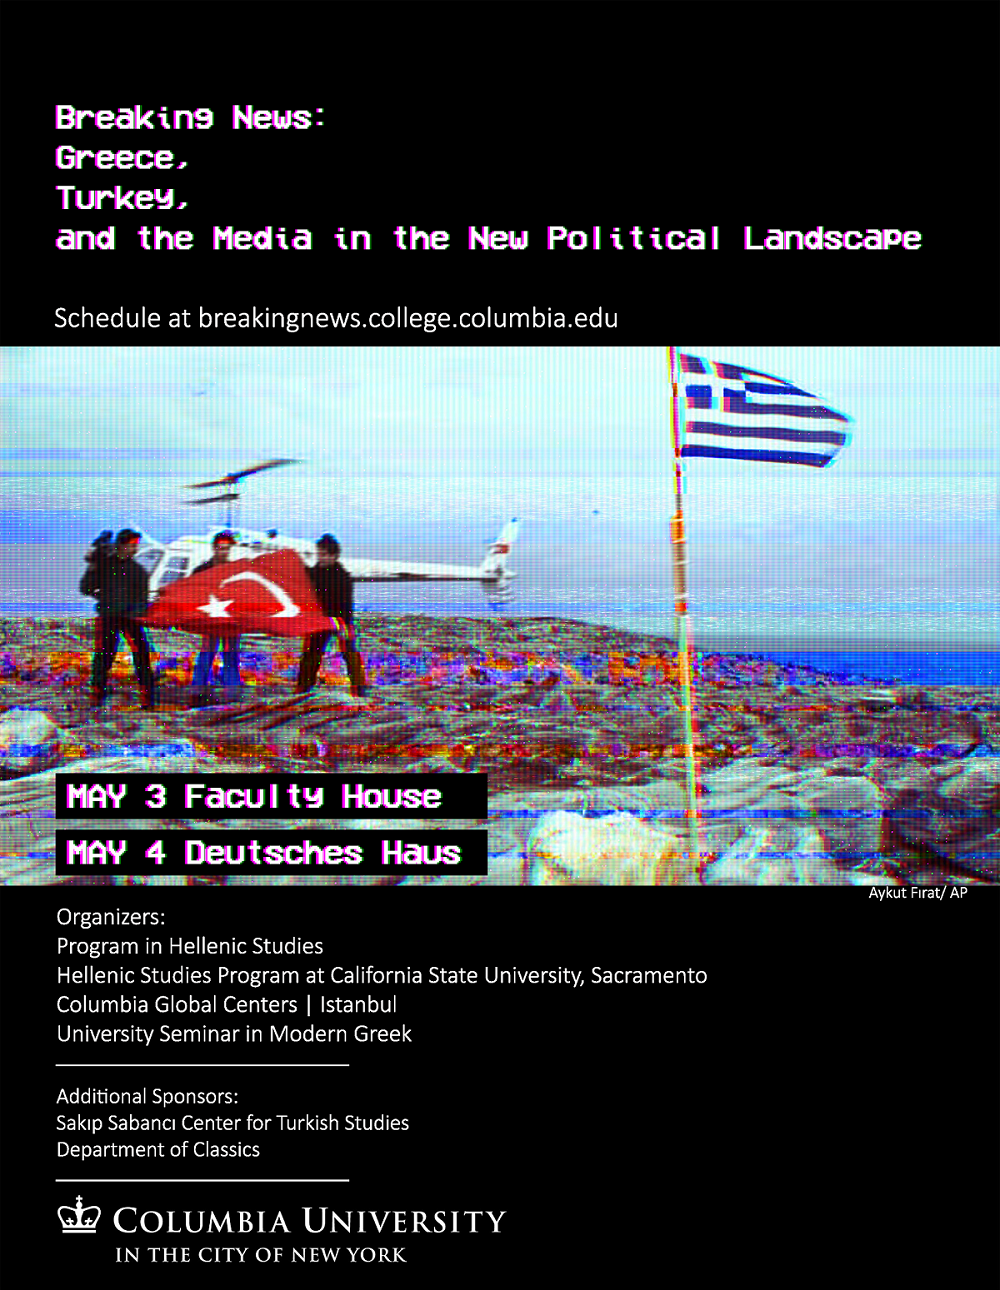 Breaking News: Greece, Turkey, and the Media in the New Political Landscape